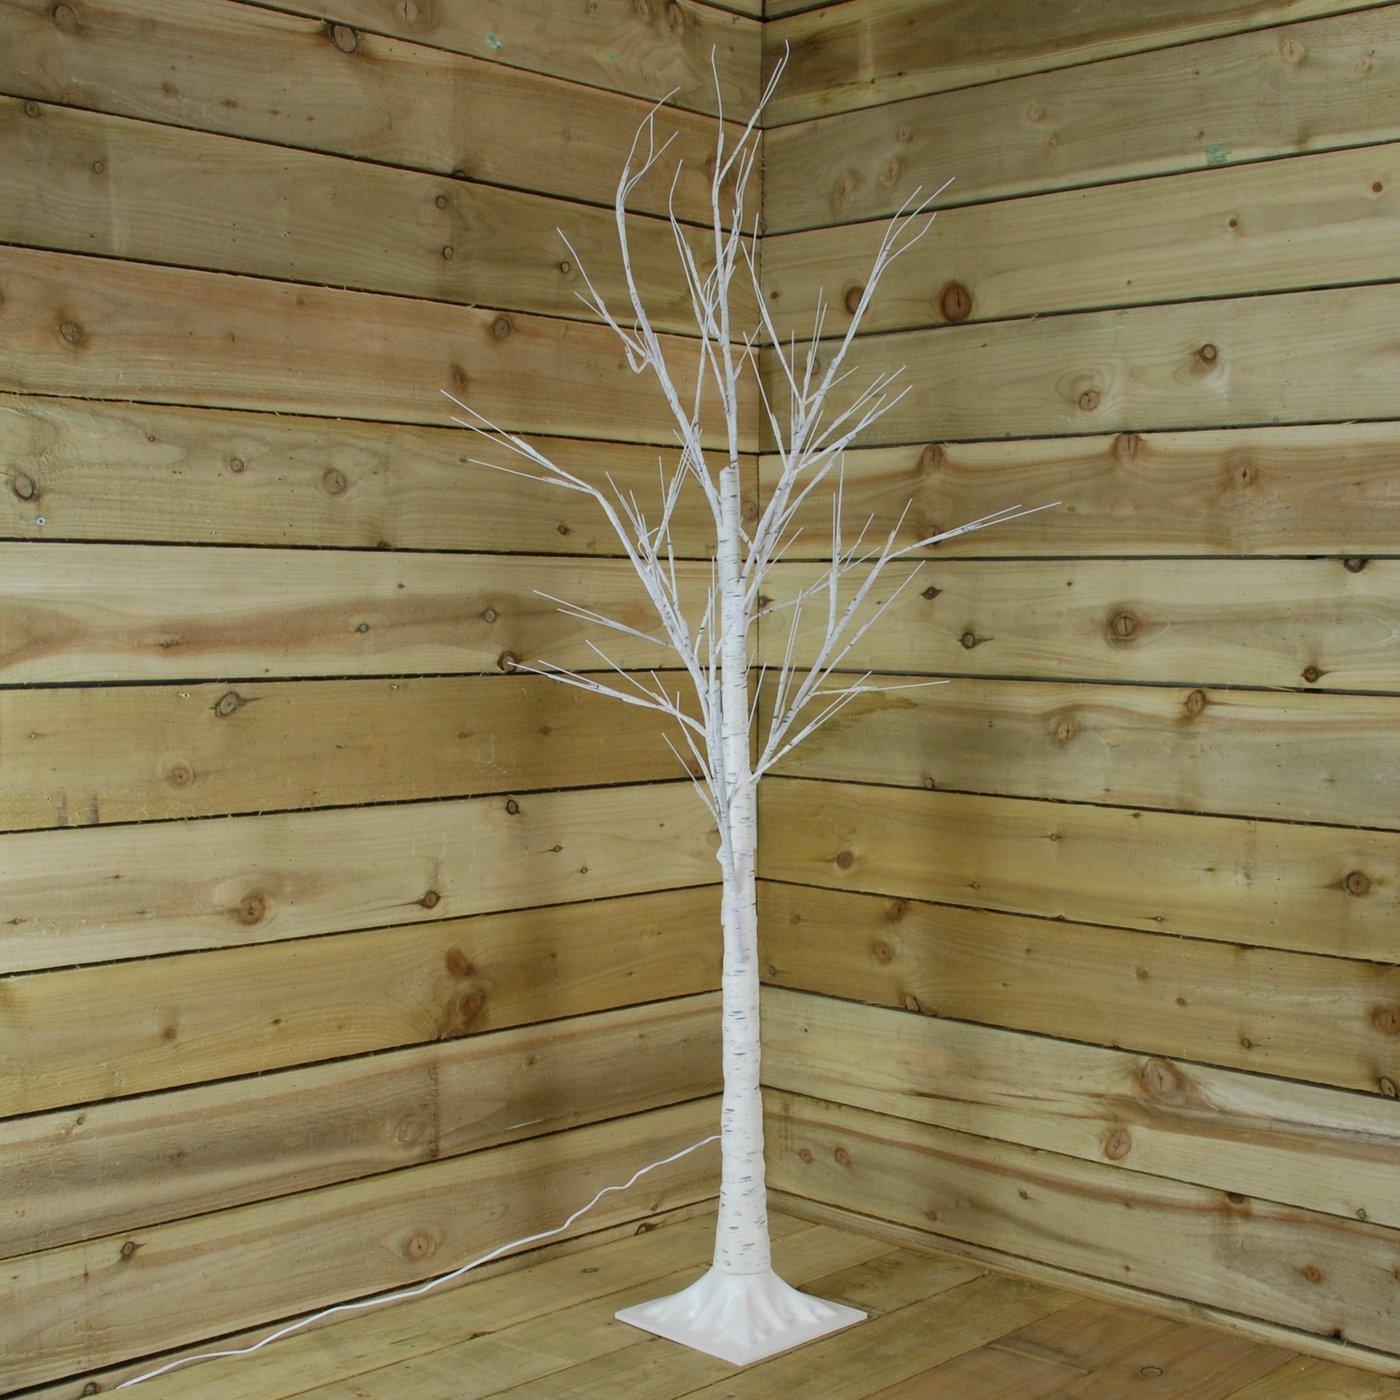 2.4m (8ft) Indoor Outdoor Christmas Lit Birch Tree with 136 Warm White LEDs